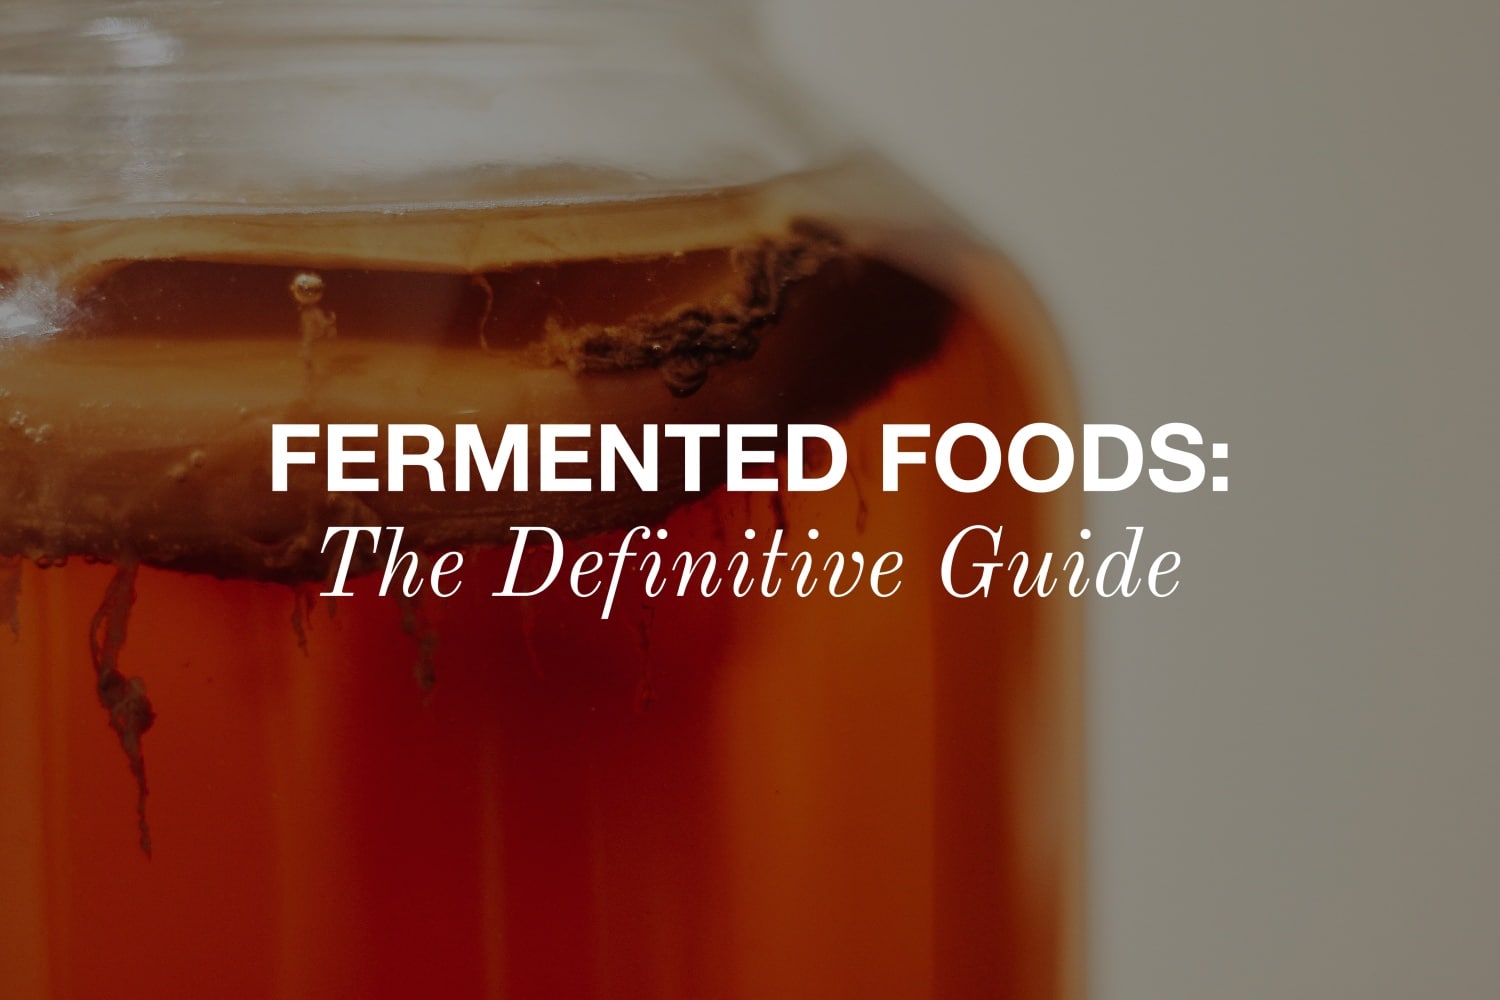 Fermented Foods: The Definitive Guide